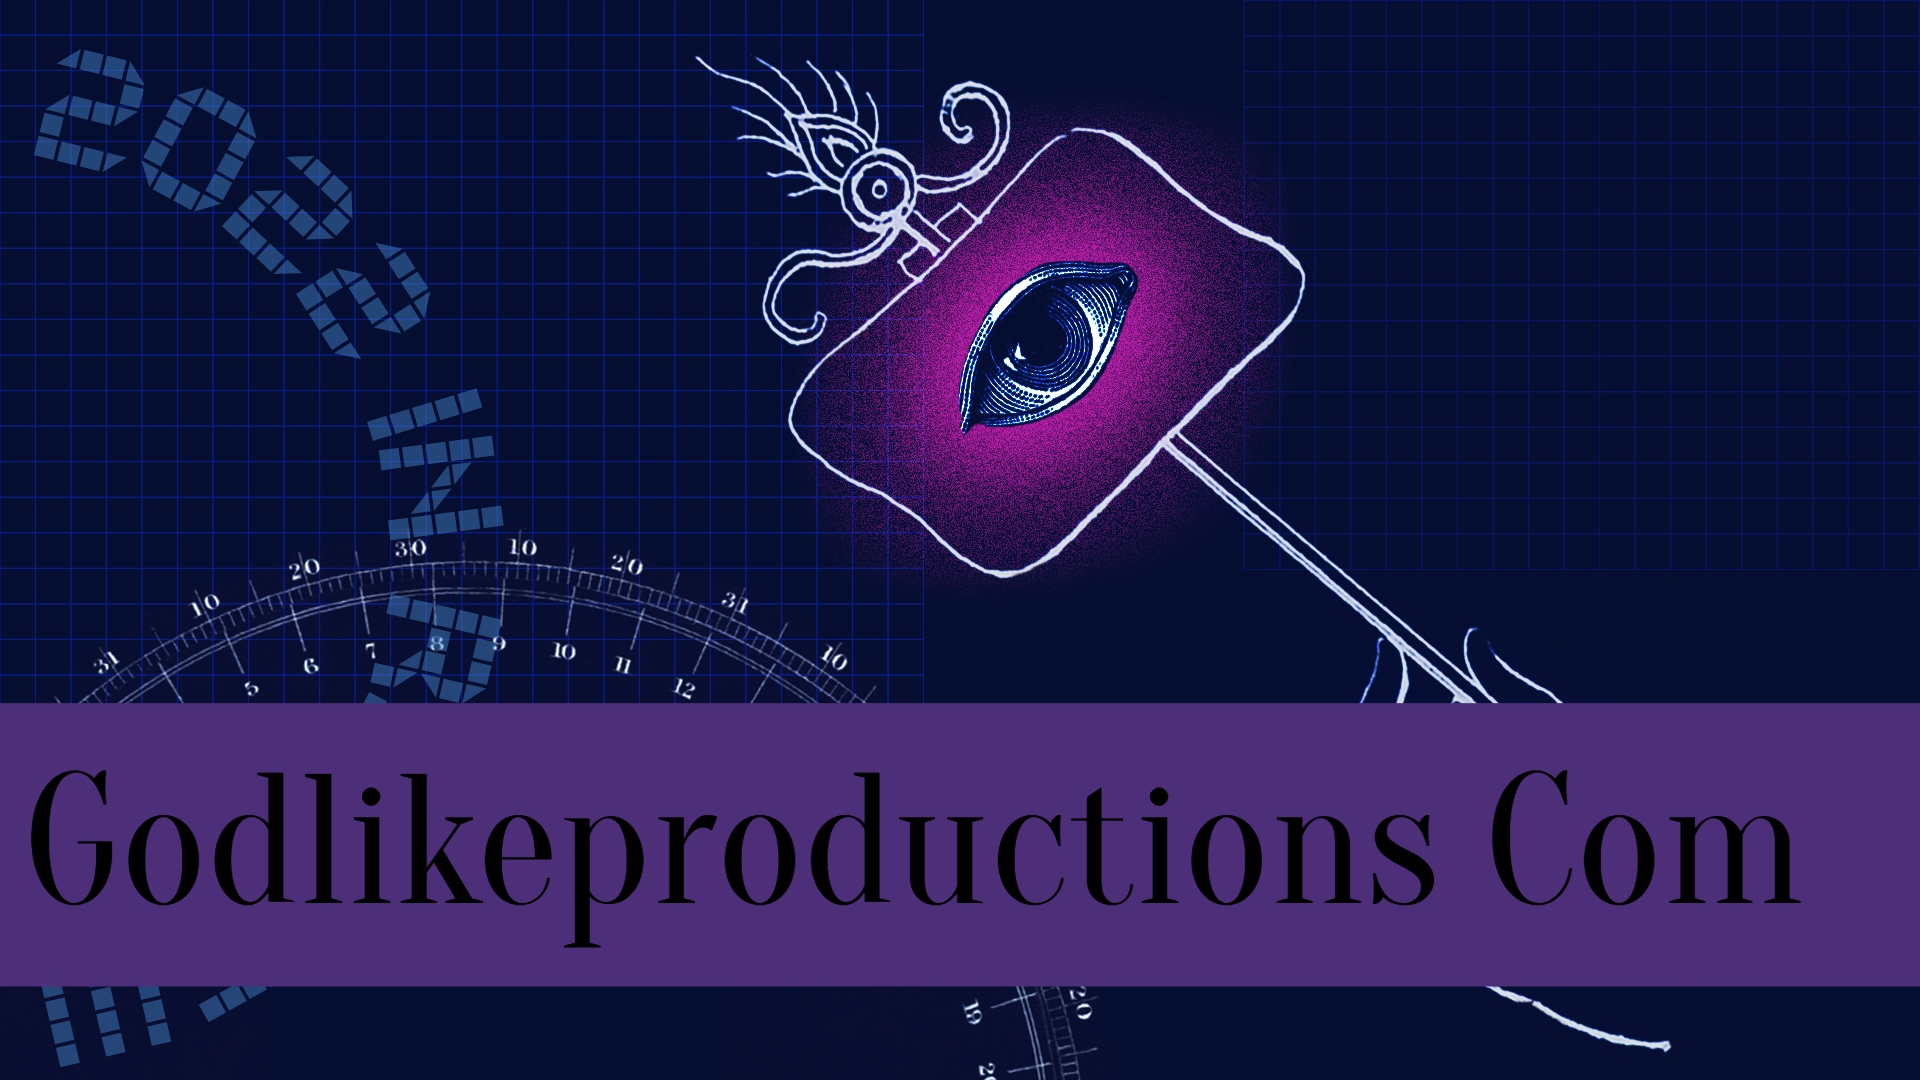 Godlikeproductions Com - Learn About The Anonymous World With The Help Of This Website